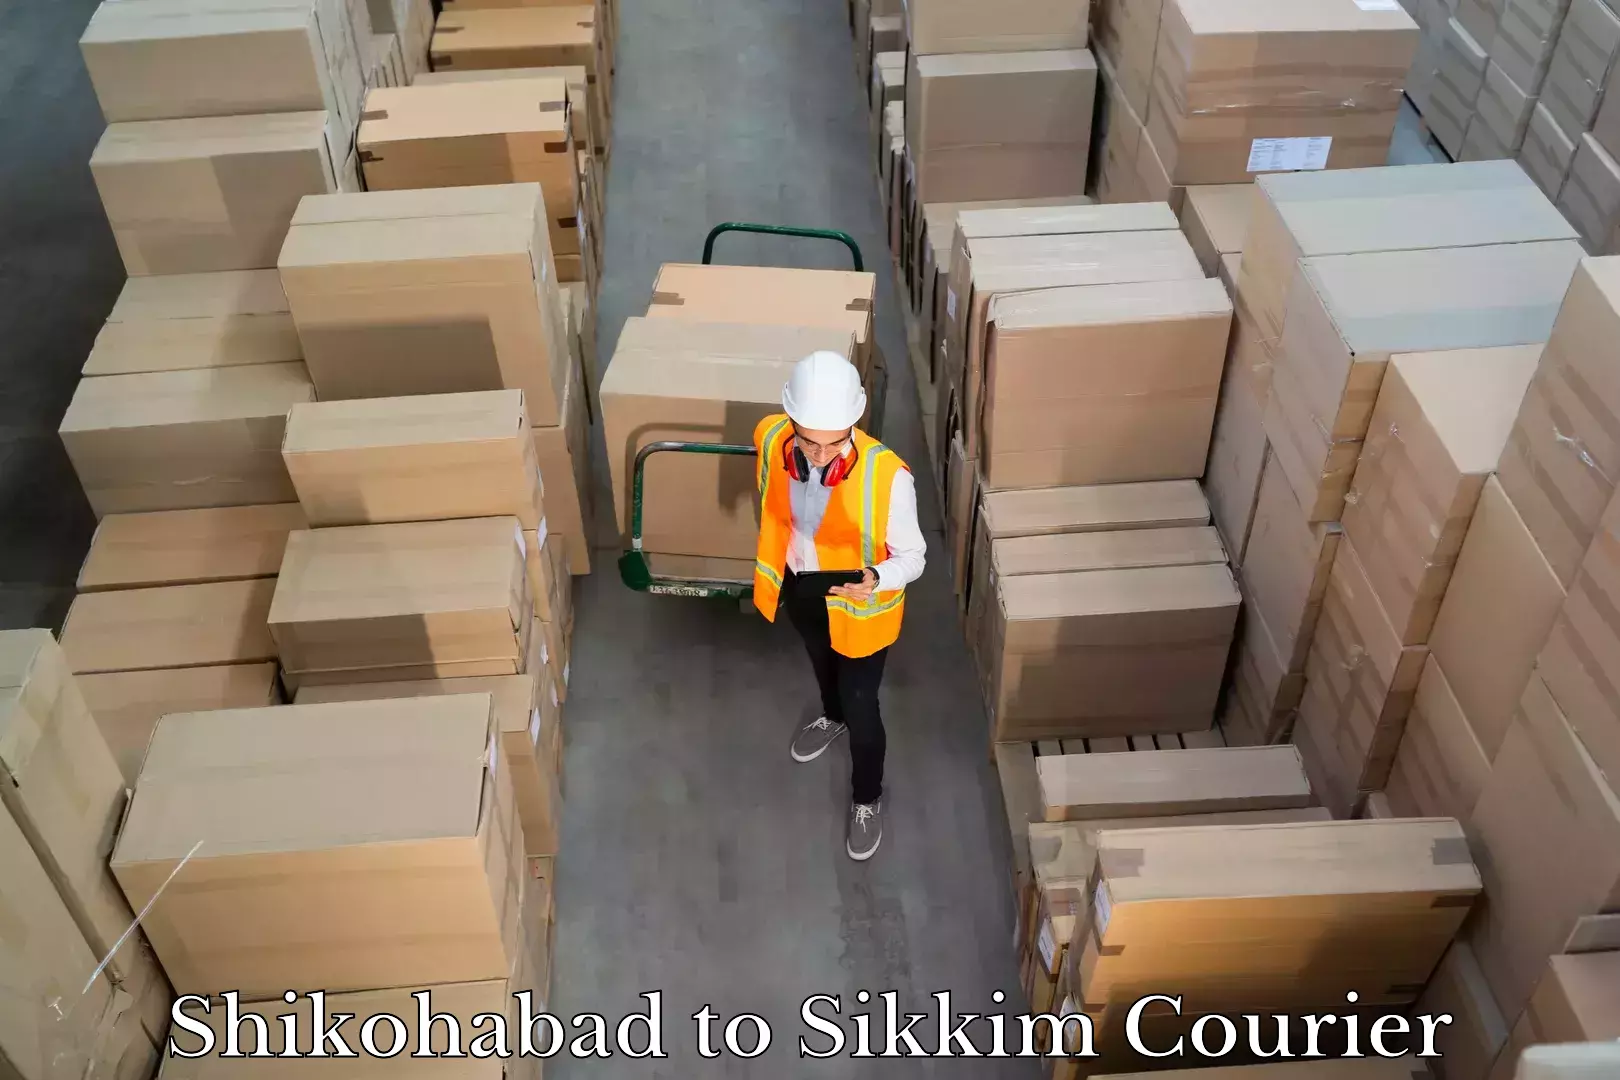 Luggage delivery app Shikohabad to Sikkim